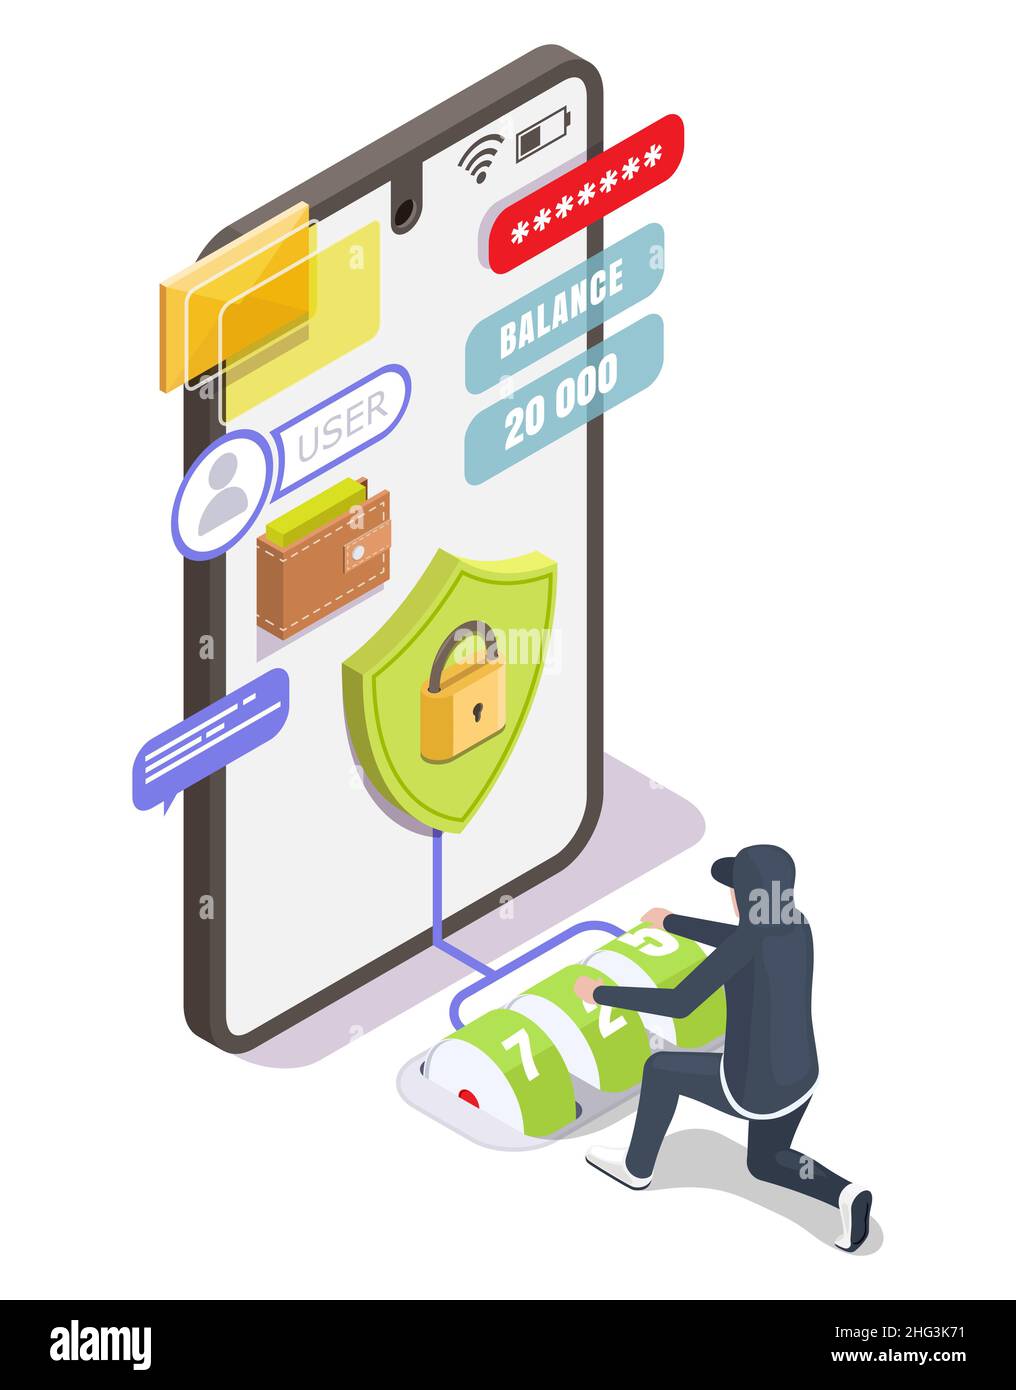 Password guessing hacking attack. Hacker stealing money, personal data from mobile device, vector isometric illustration Stock Vector